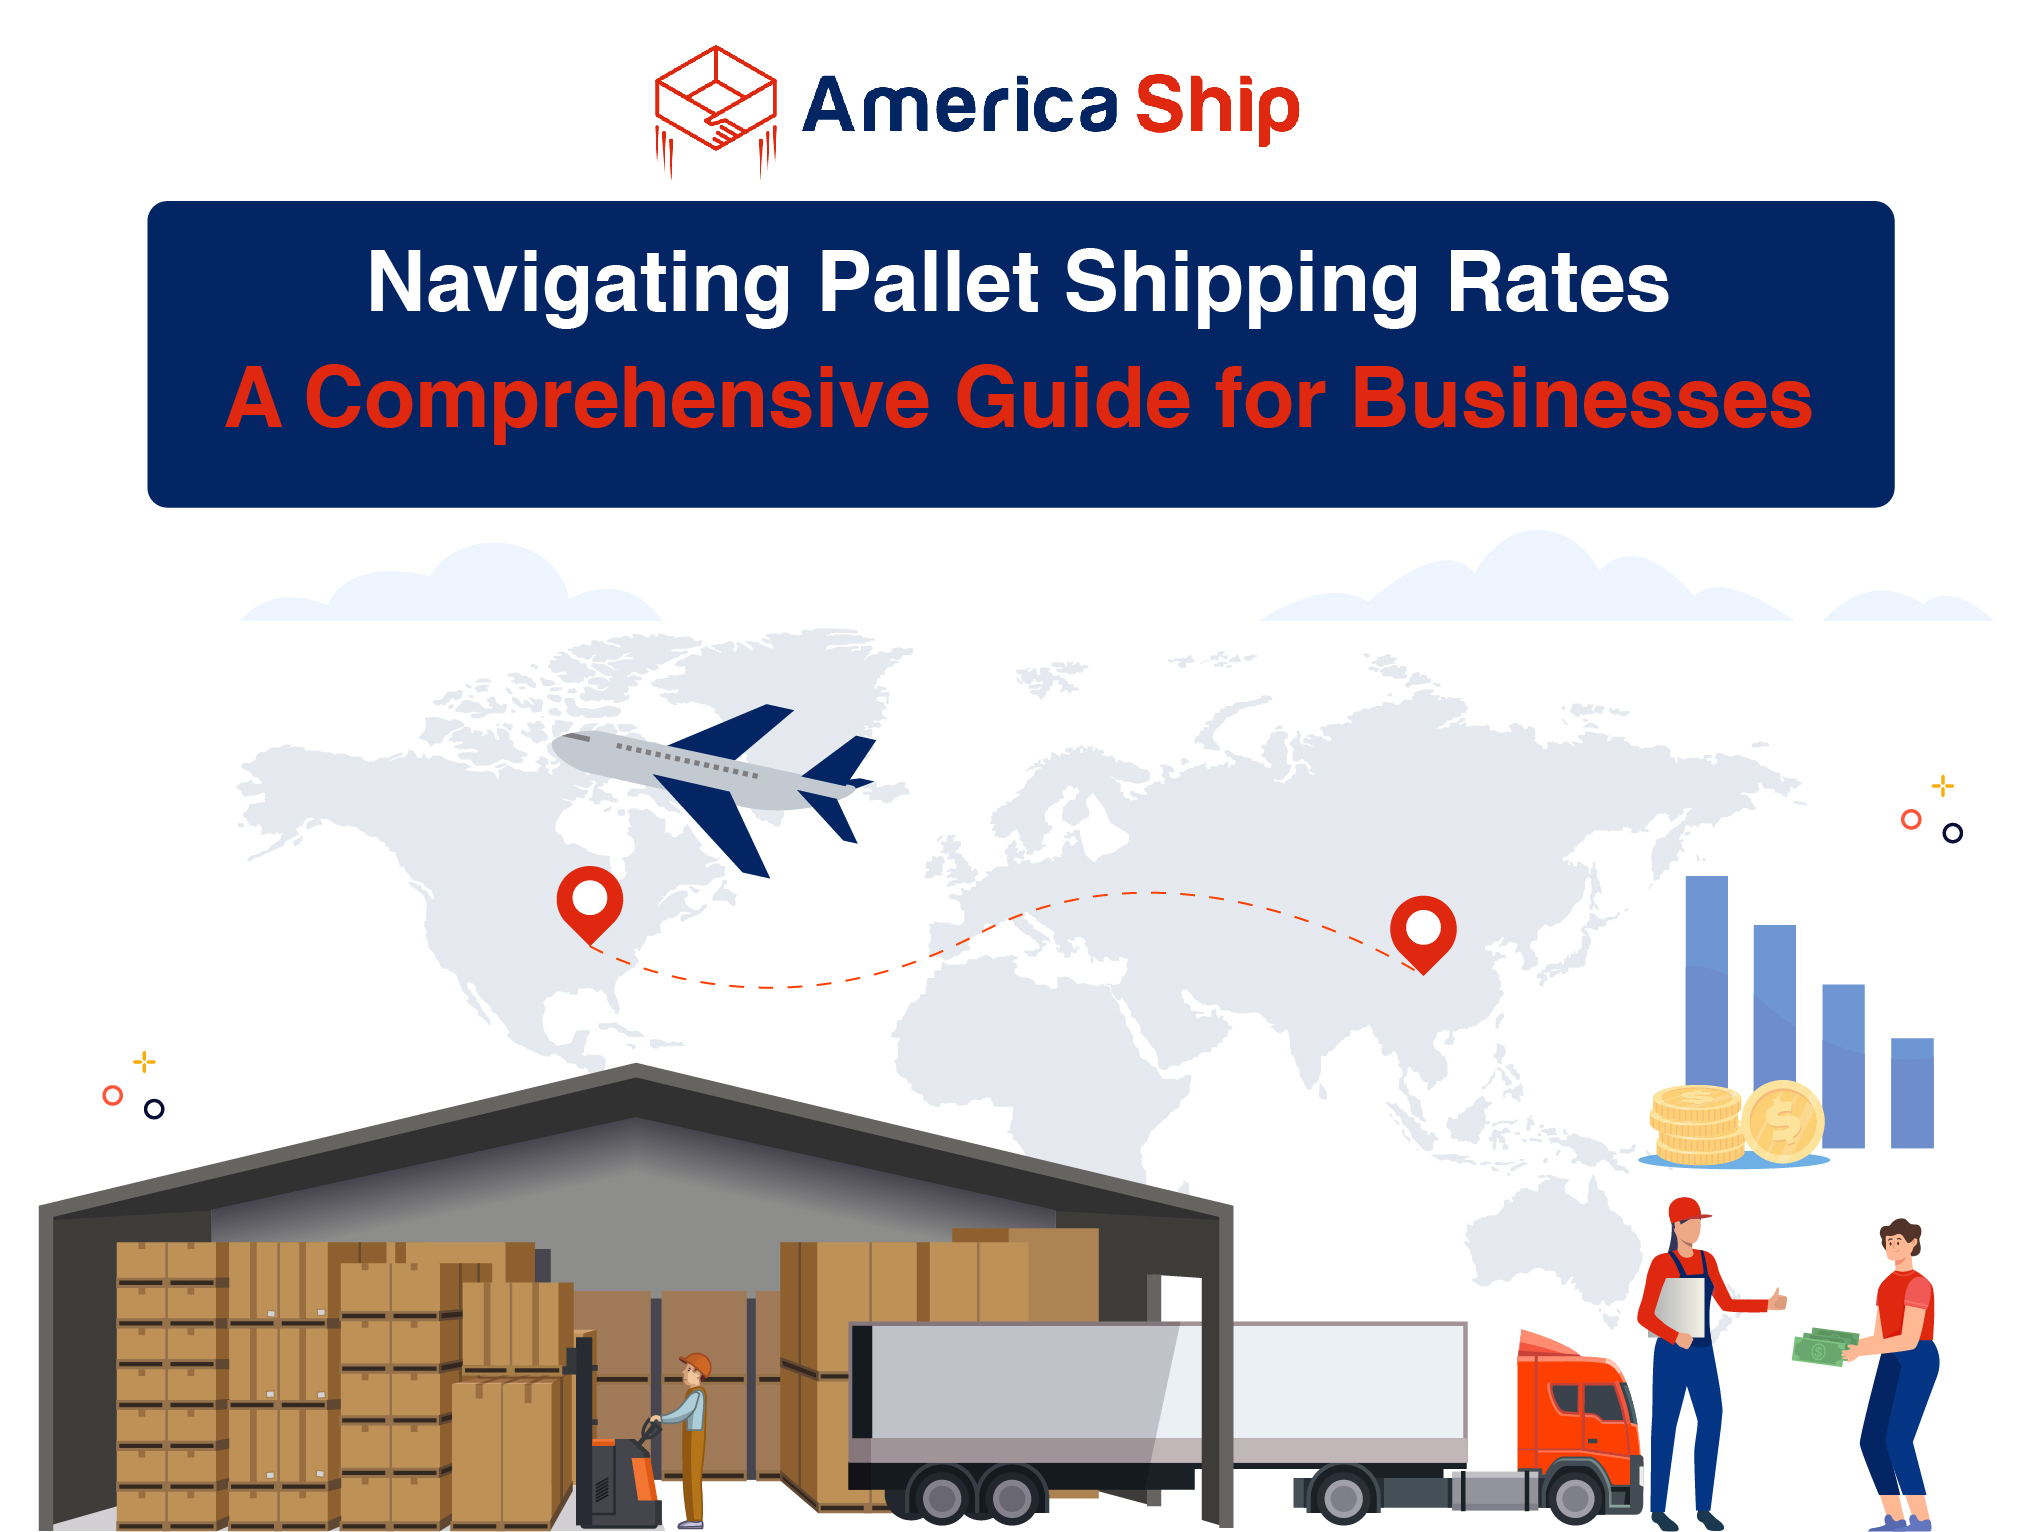 Navigating Pallet Shipping Rates: A Comprehensive Guide for Businesses